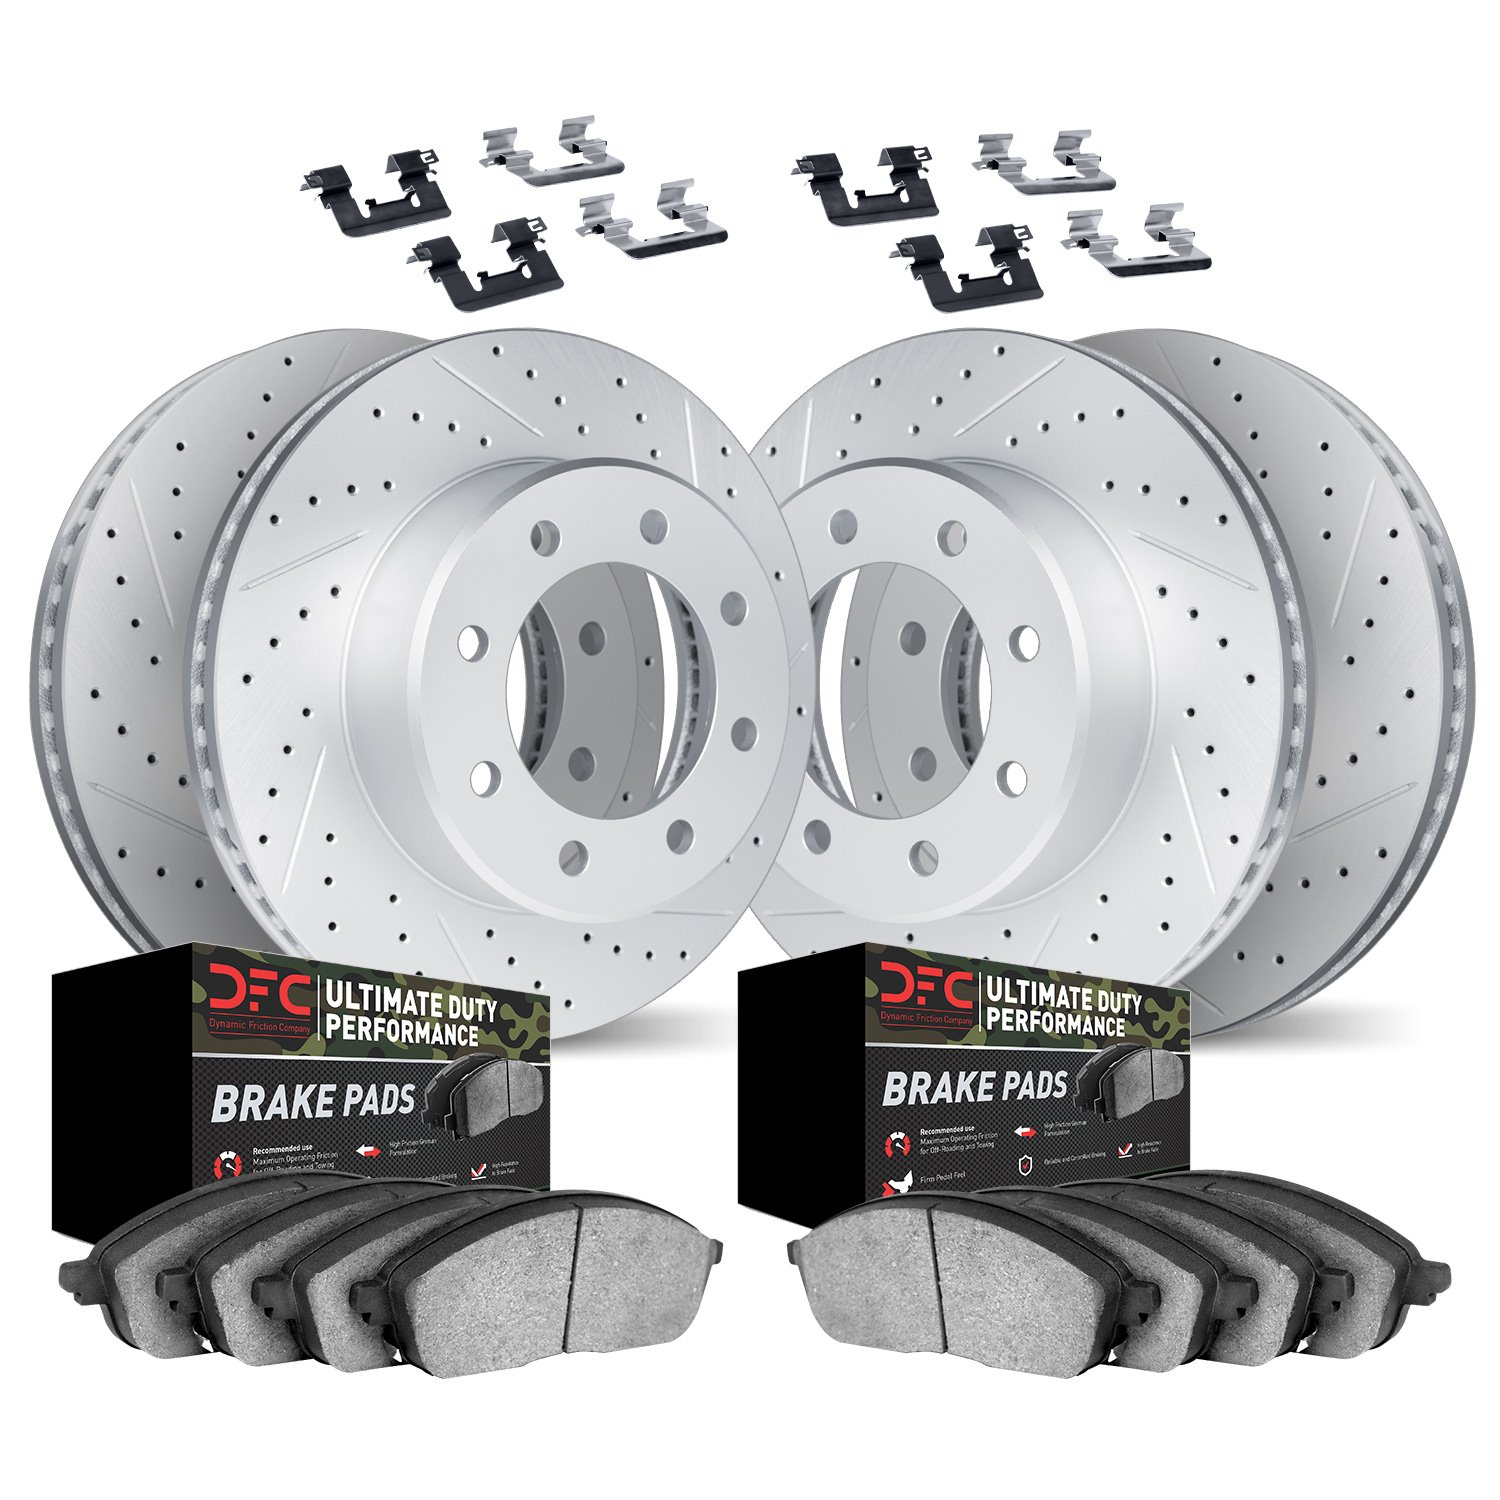 2414-54032 Geoperformance Drilled/Slotted Brake Rotors with Ultimate-Duty Brake Pads Kit & Hardware, 2005-2007 Ford/Lincoln/Merc